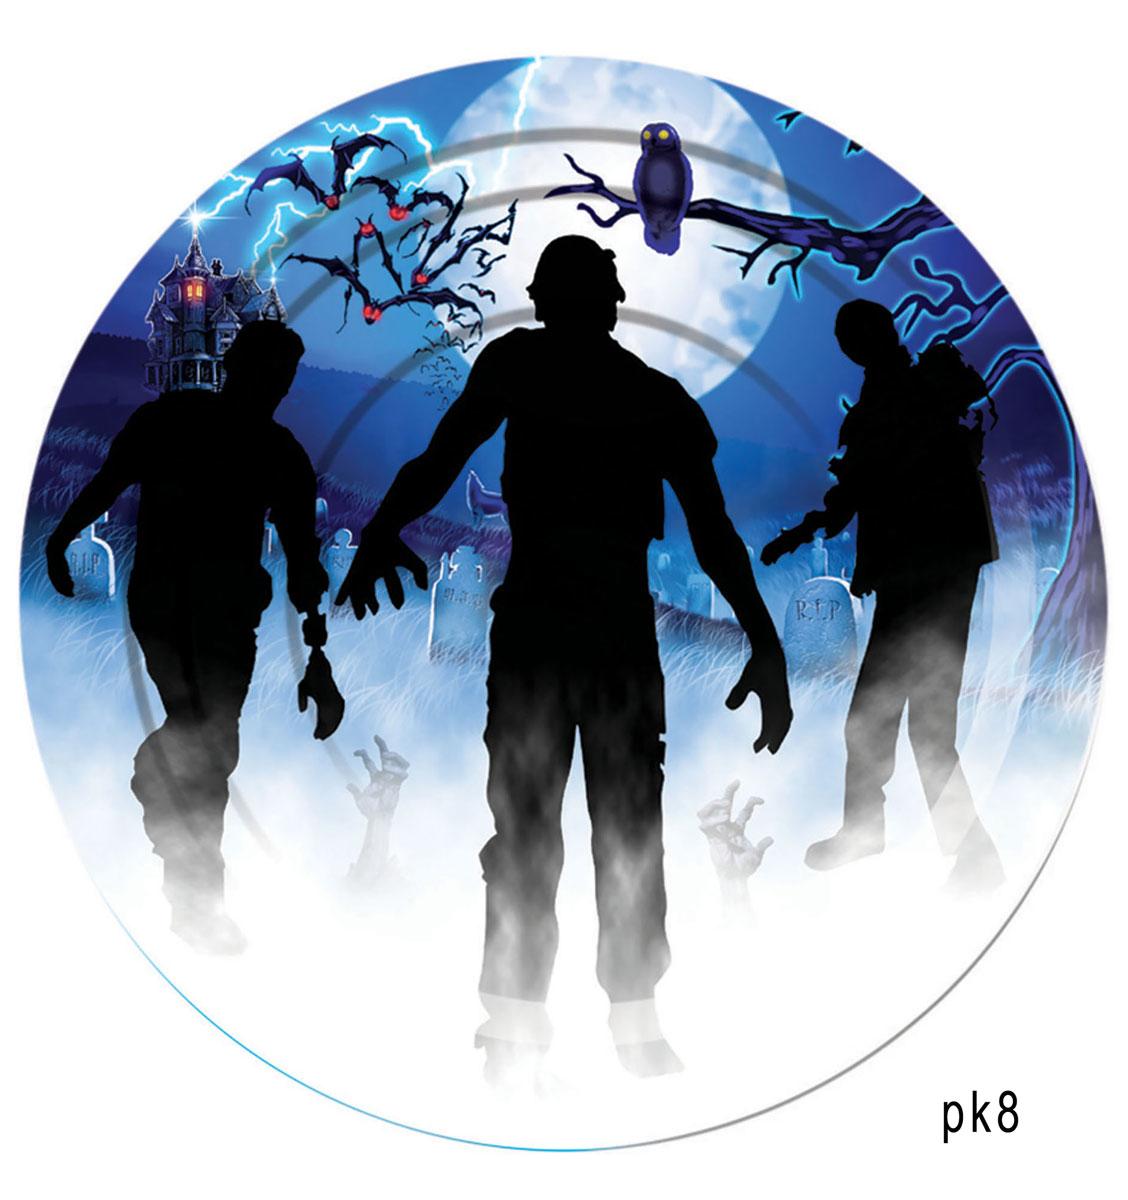 Pack of 8 Zombie Rising 9" Dinner Paper Plates by Forum Novelties 79138 available here at Karnival Costumes online Halloween party shop